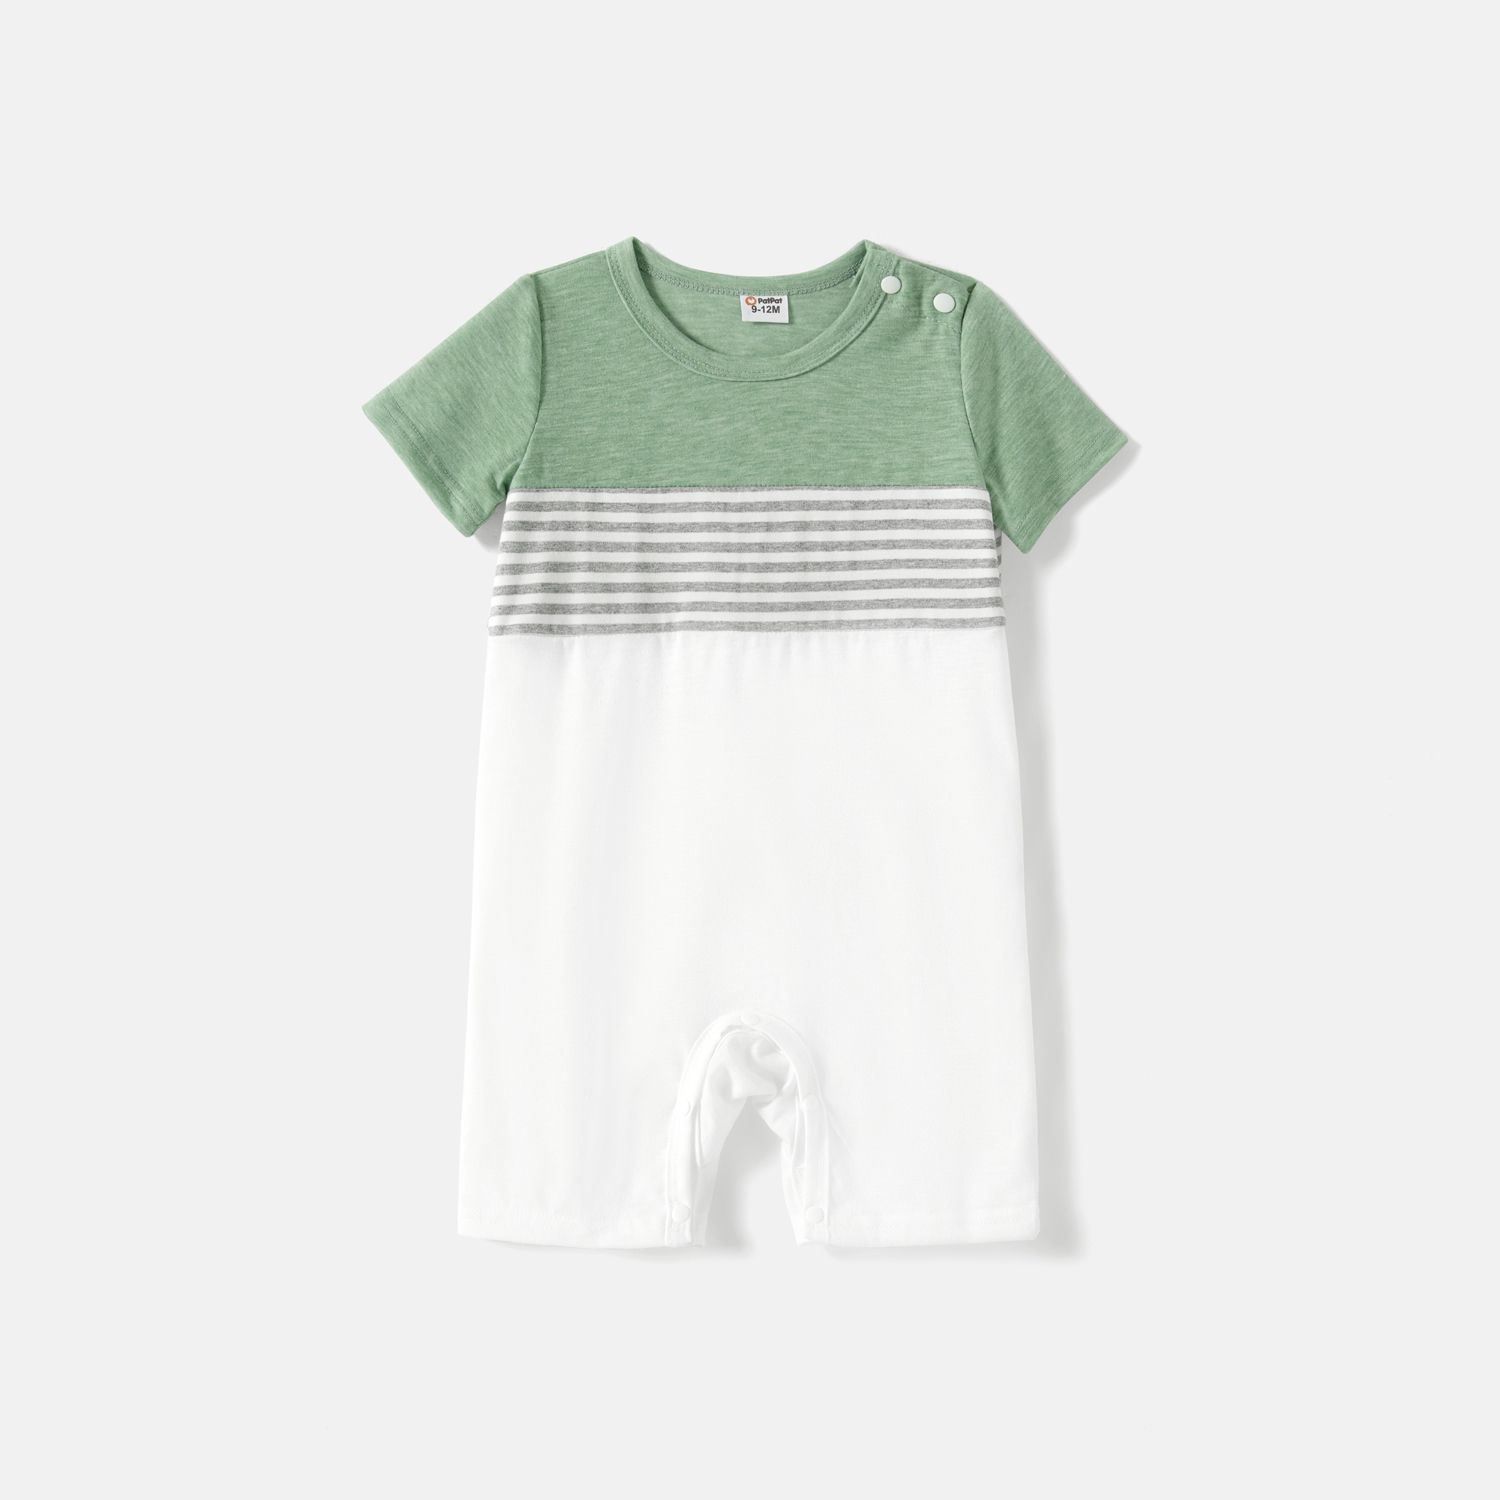 Family Matching Solid Short-sleeve Belted Dresses And Striped Colorblock T-shirts Sets